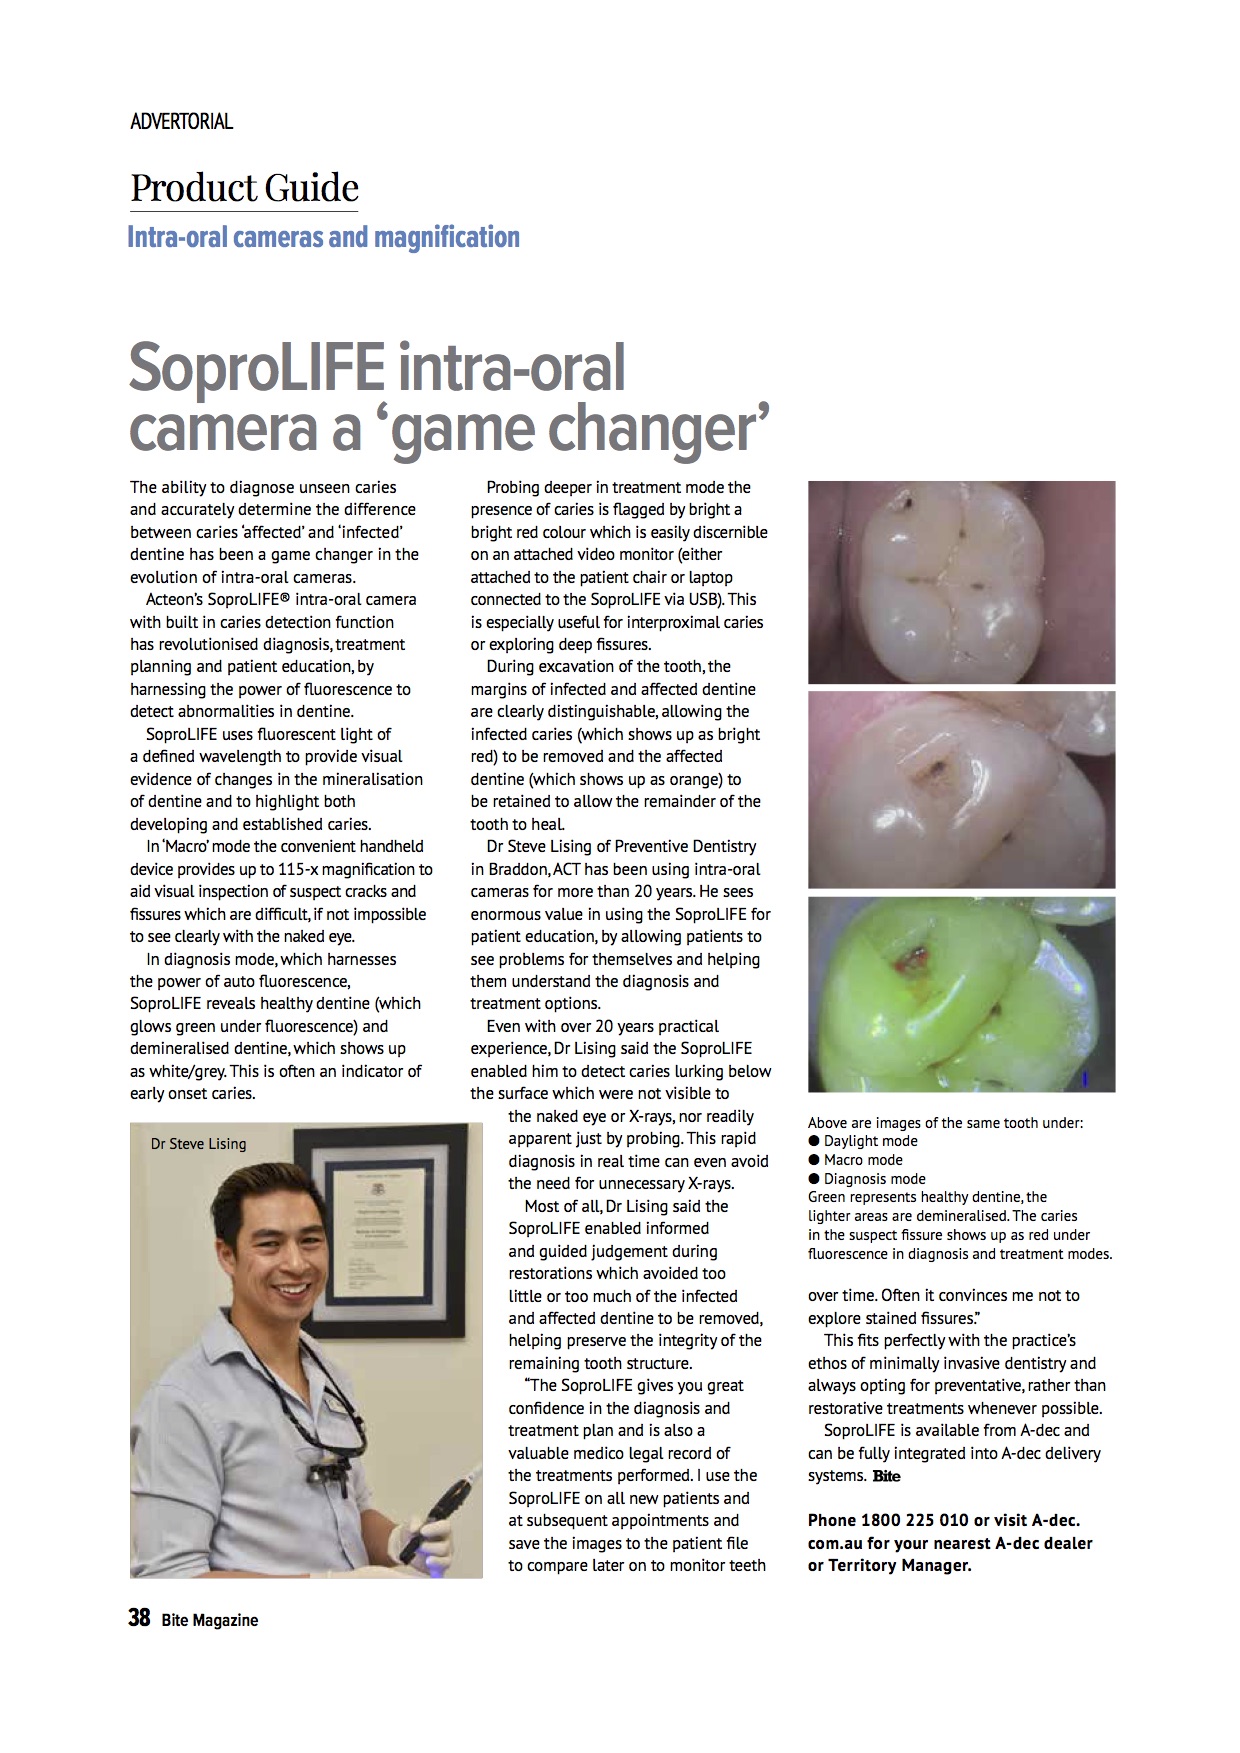 Article featuring Dr Steve Lising published in Bite Magazine